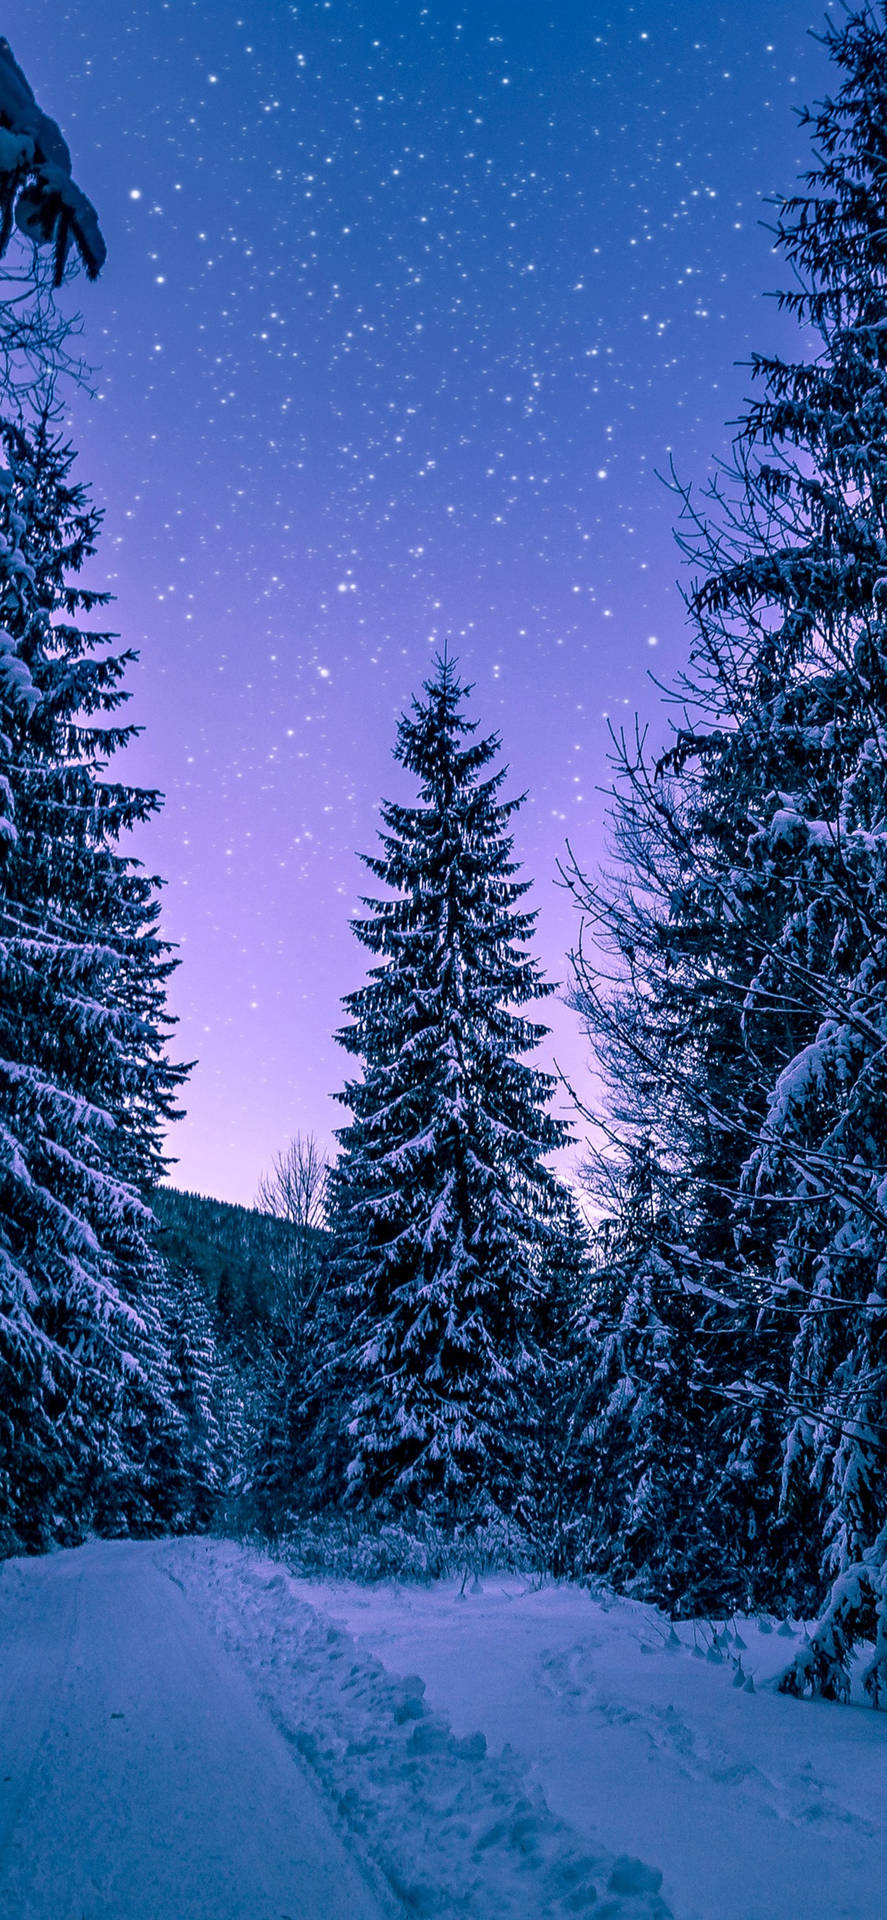 Dreamy Winter Forest Iphone Background